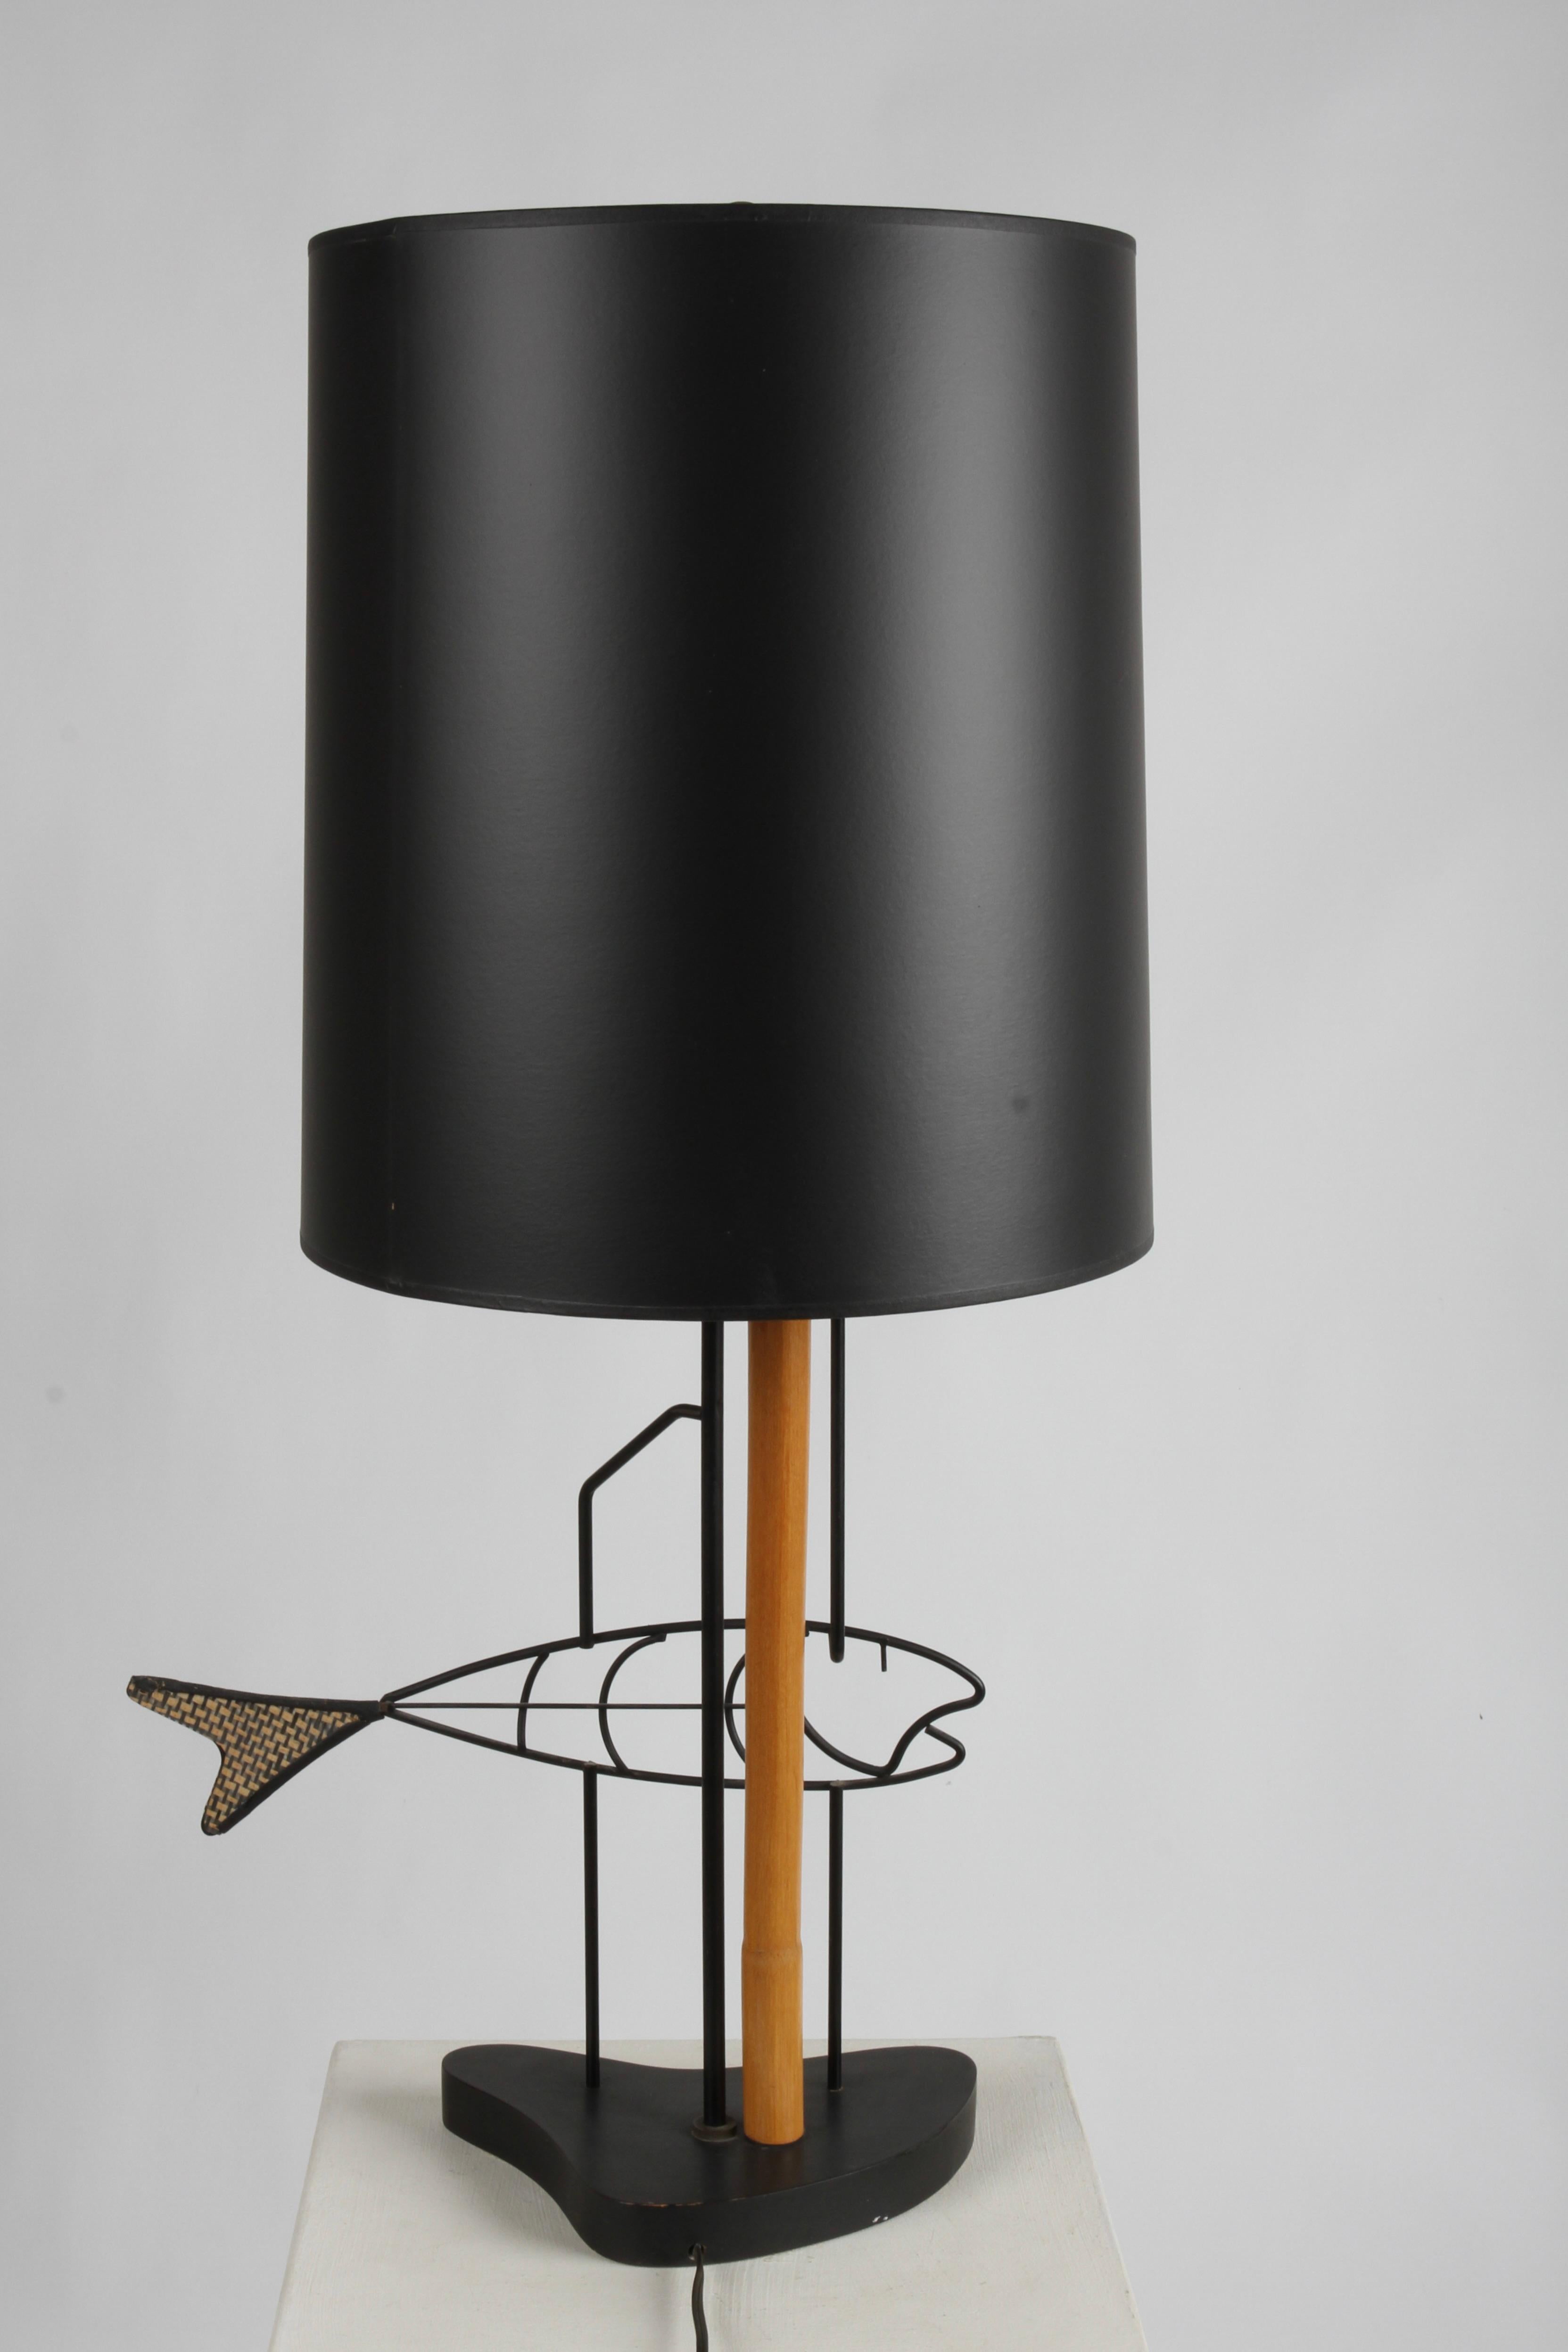 Mid-Century Modern Wrought Iron Fish From, Bamboo Table Lamp on Biomorphic Base For Sale 7